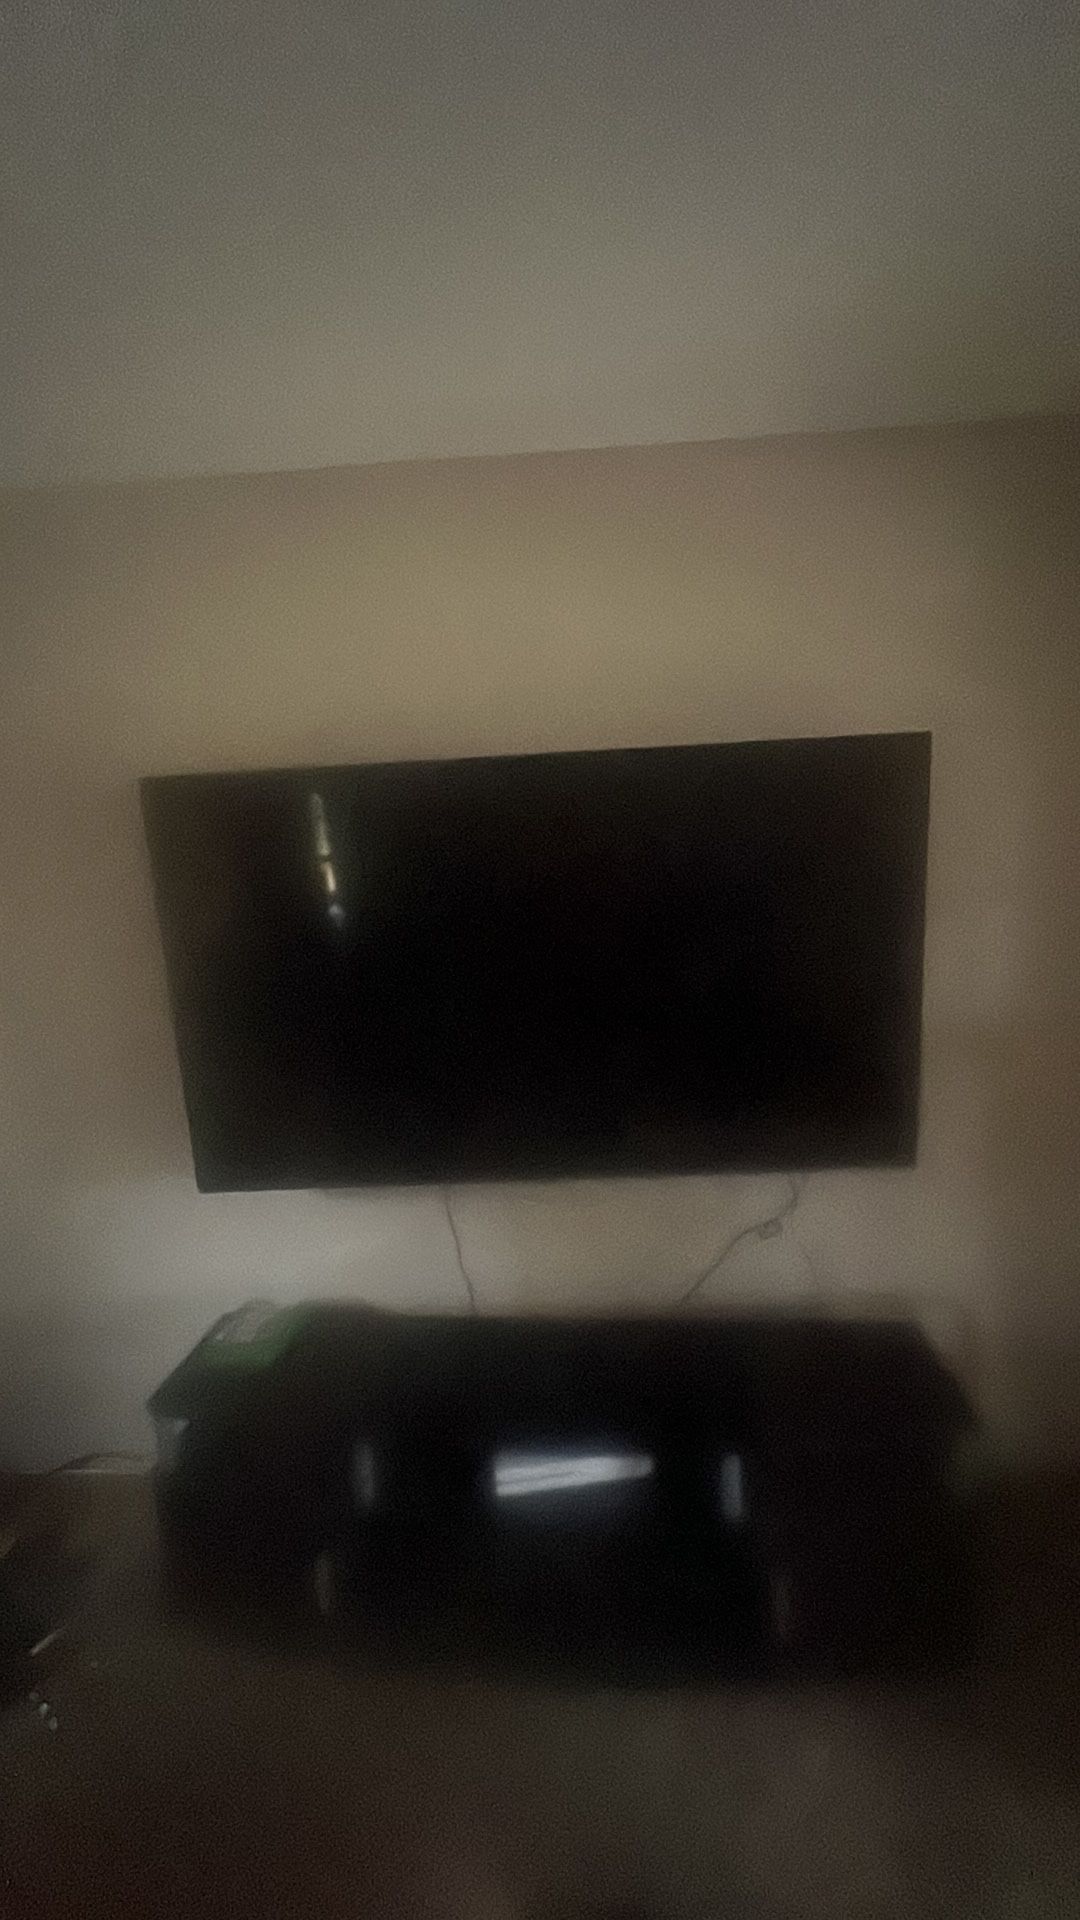 70 Inch Samsung Flatscreen And Xbox One + Entertainment Stand 